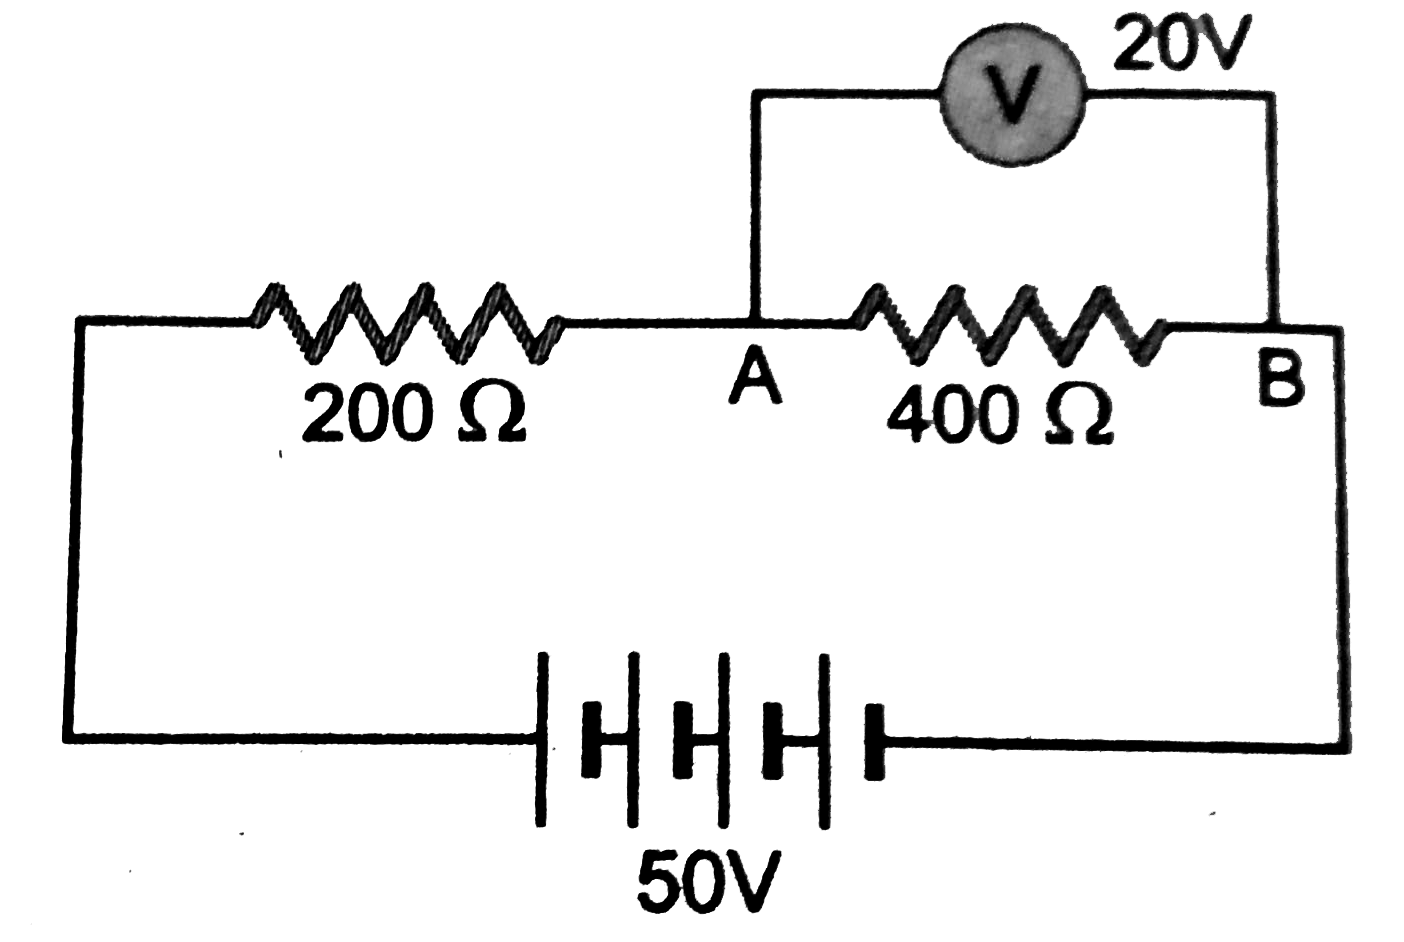 In the circuit given below, a voltmeter reads 20V when it is connected across 400Omega resistance. Calculate what the same voltmeter will read when connected across the 200Omega resistance.